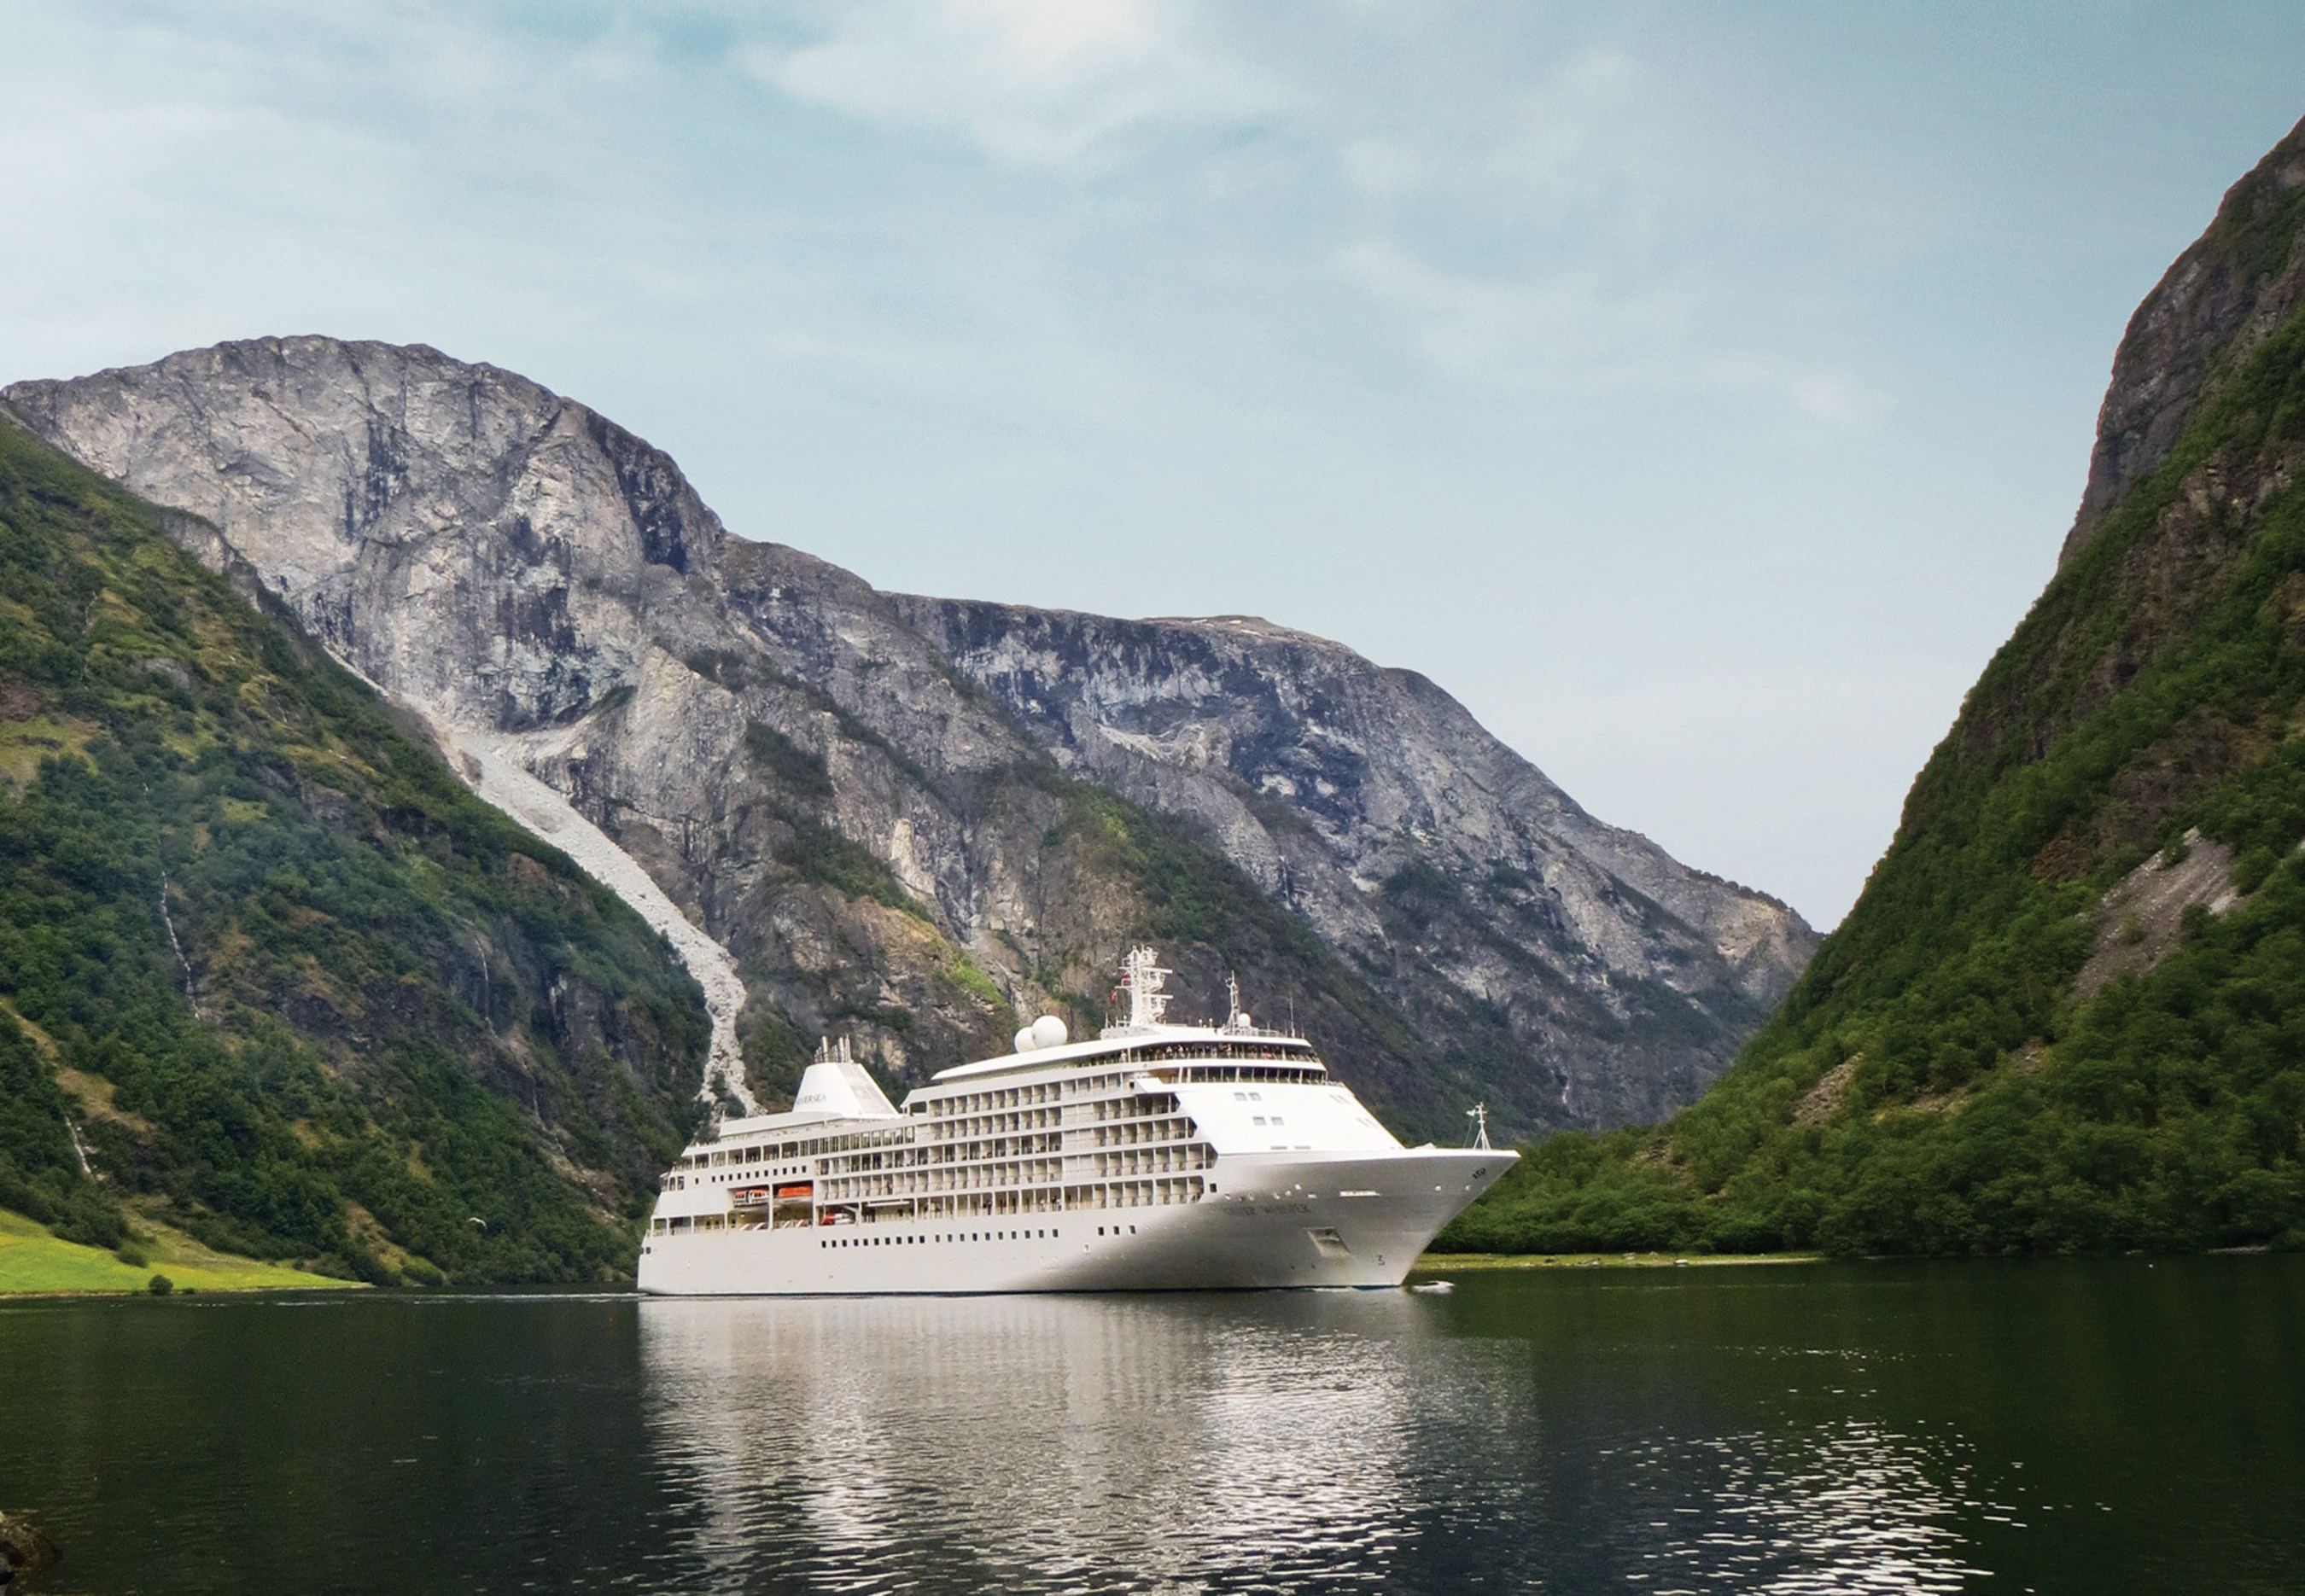 Silversea Announces 2017 Itineraries Now Open for Reservations